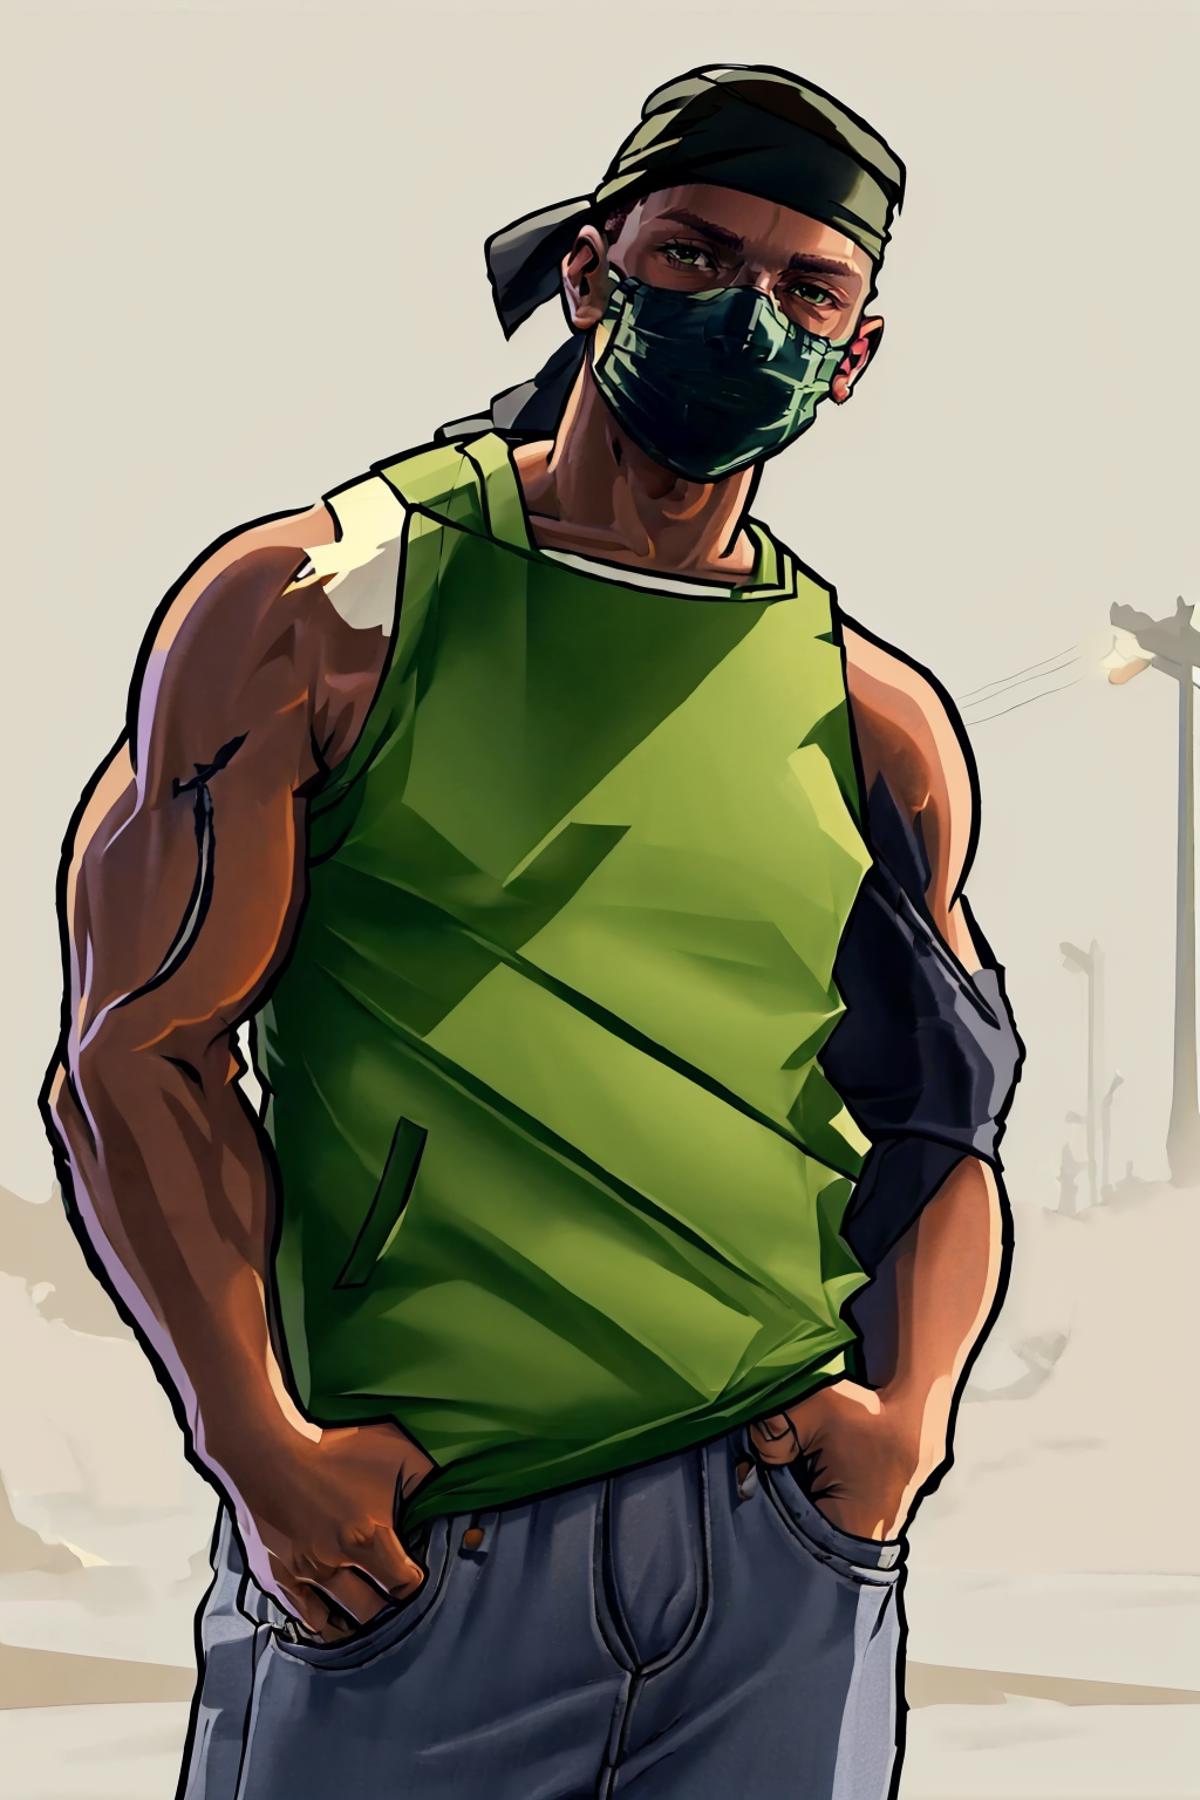 Grand Theft Auto: San Andreas (Style) LoRA image by richyrich515